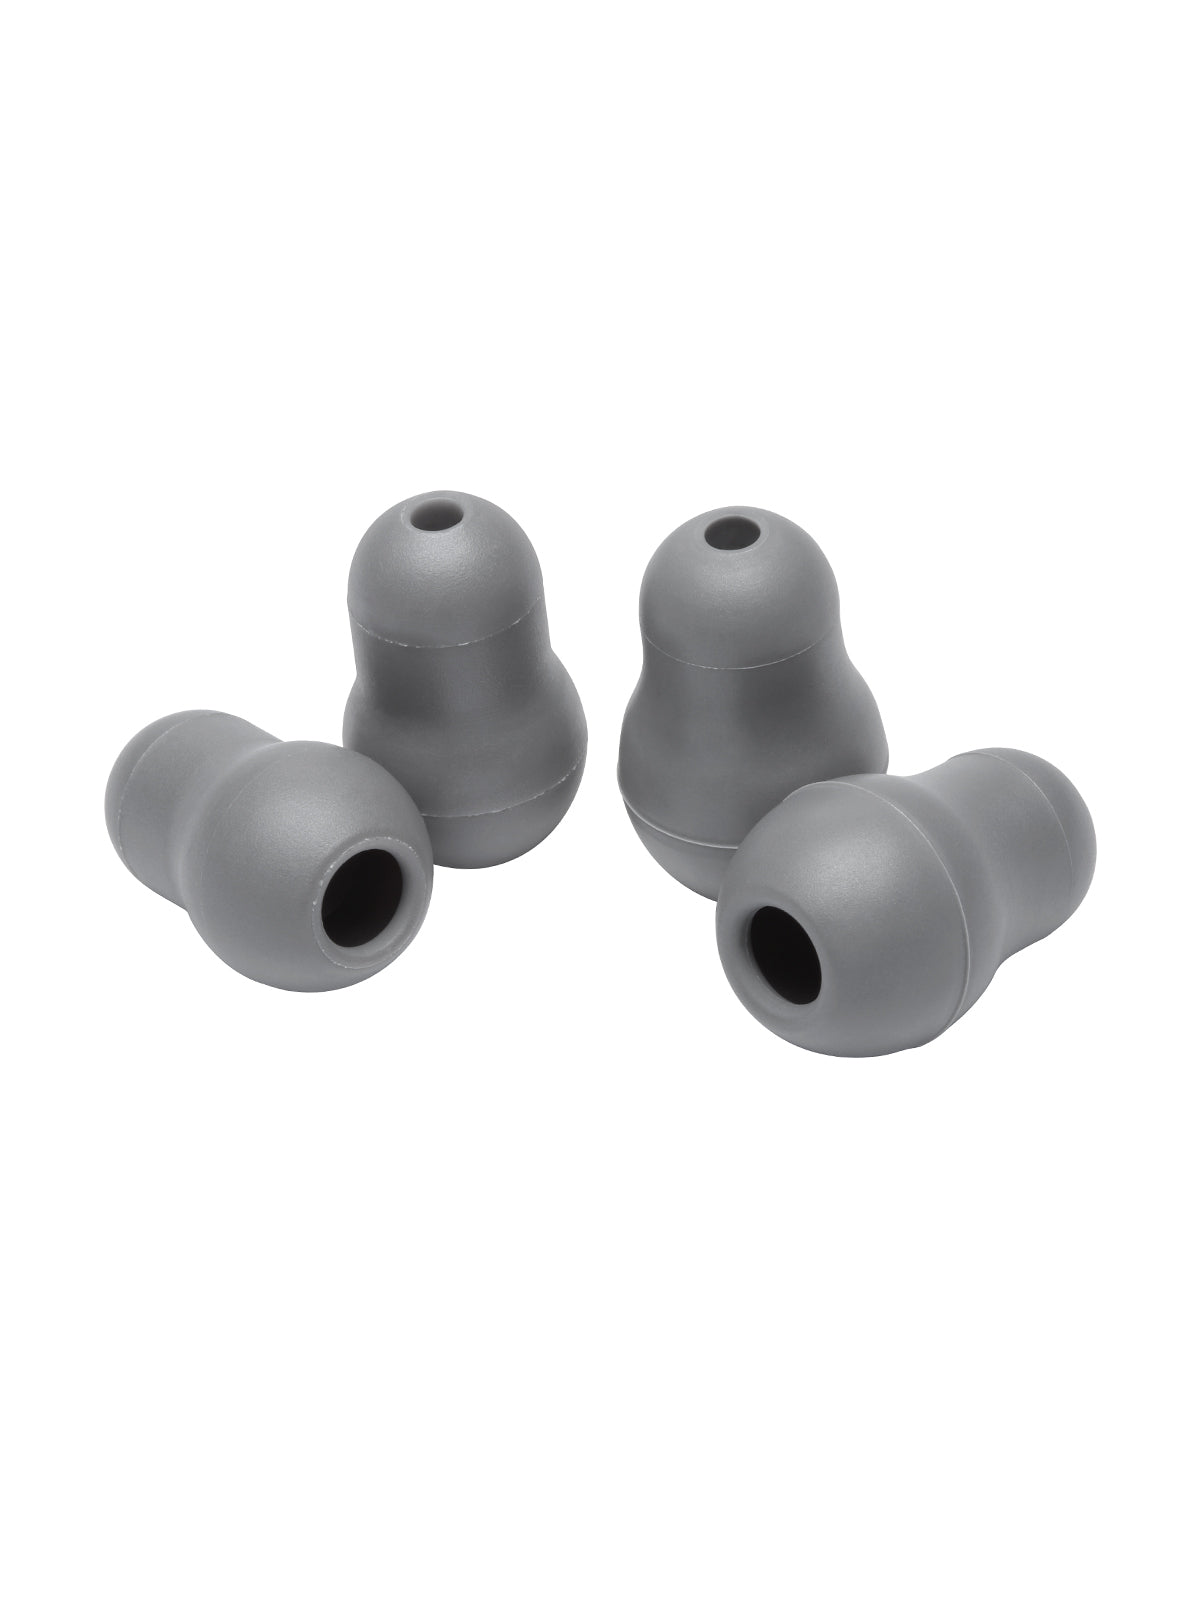 Large and Small Soft-Sealing Eartips - Gray